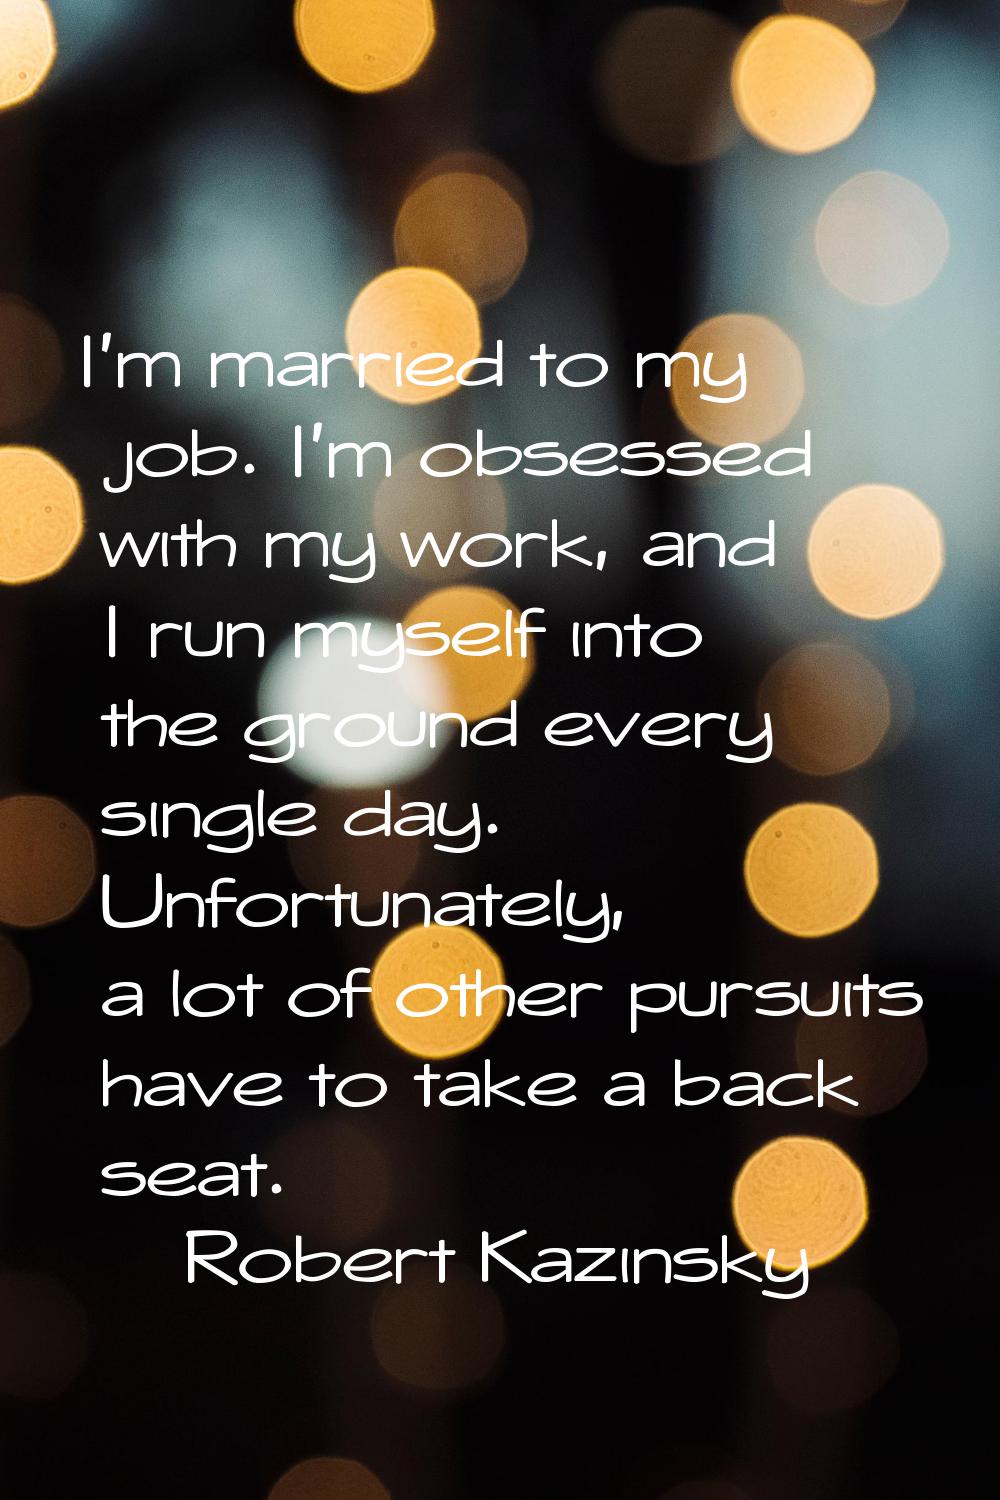 I'm married to my job. I'm obsessed with my work, and I run myself into the ground every single day